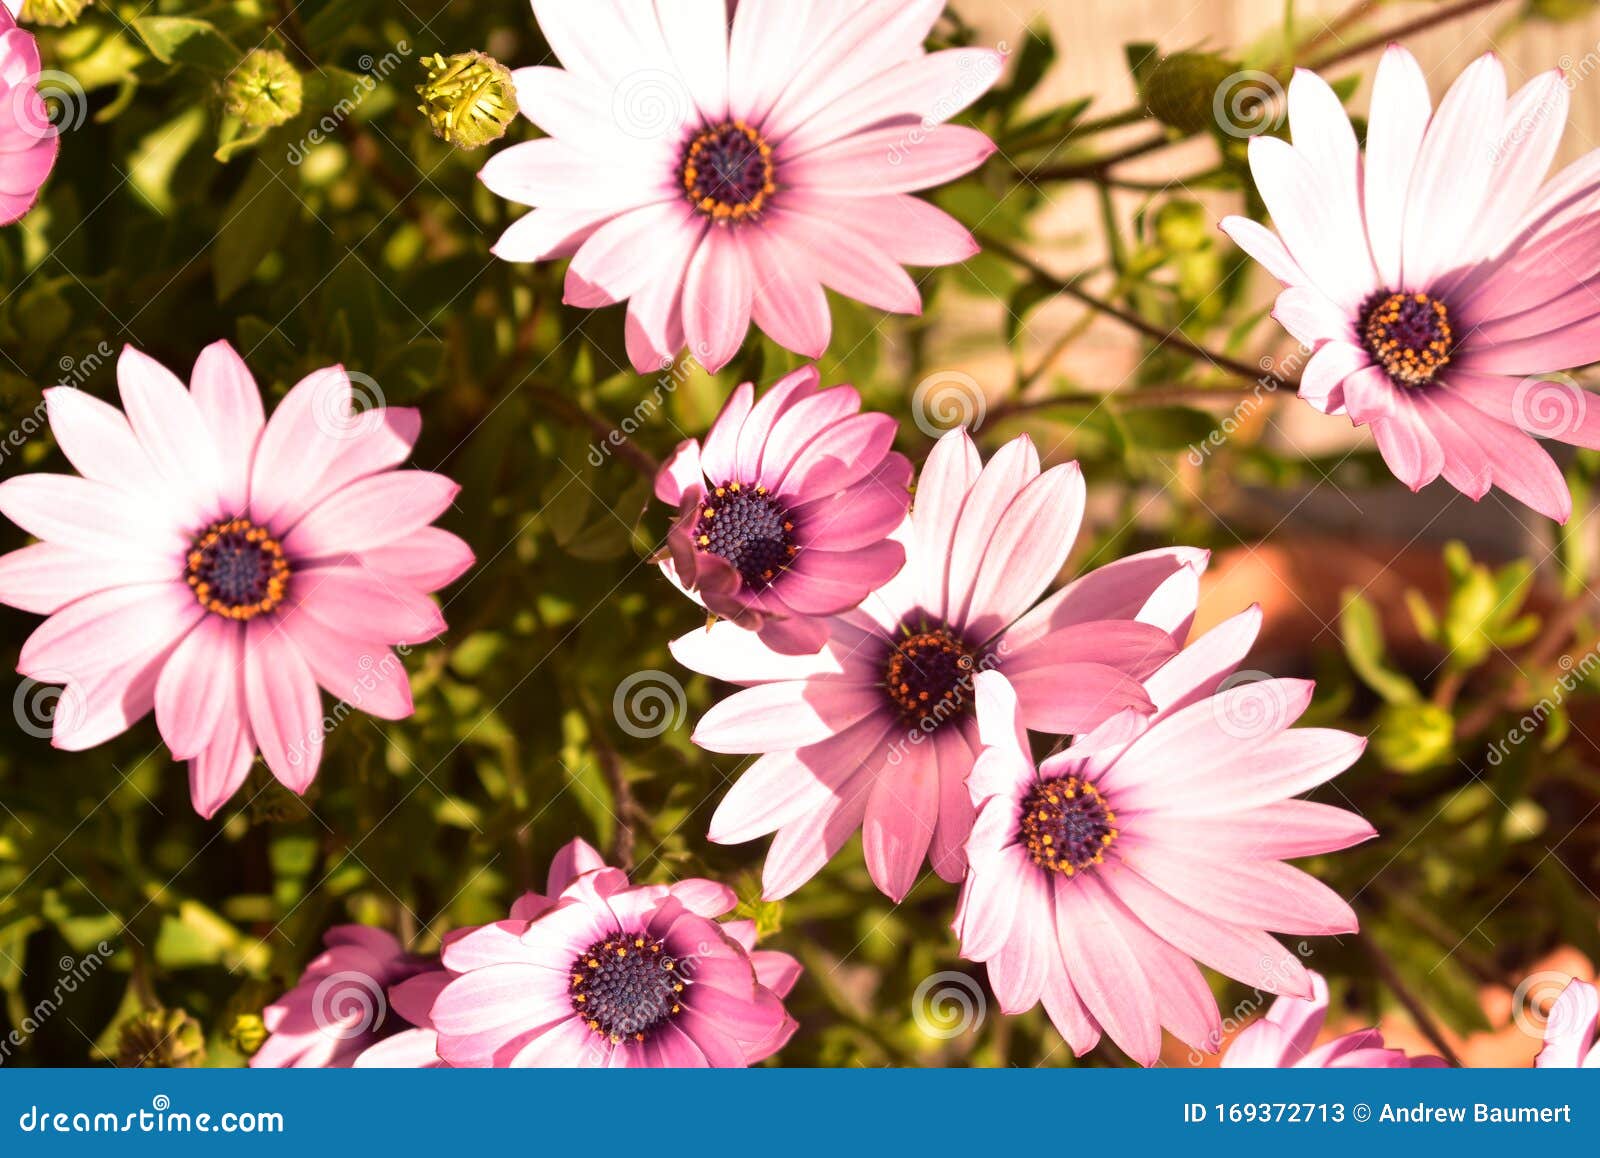 Purple Cape Marguerite Growing In Amsterdam In The Spring Stock Image Image Of Fine Background 169372713